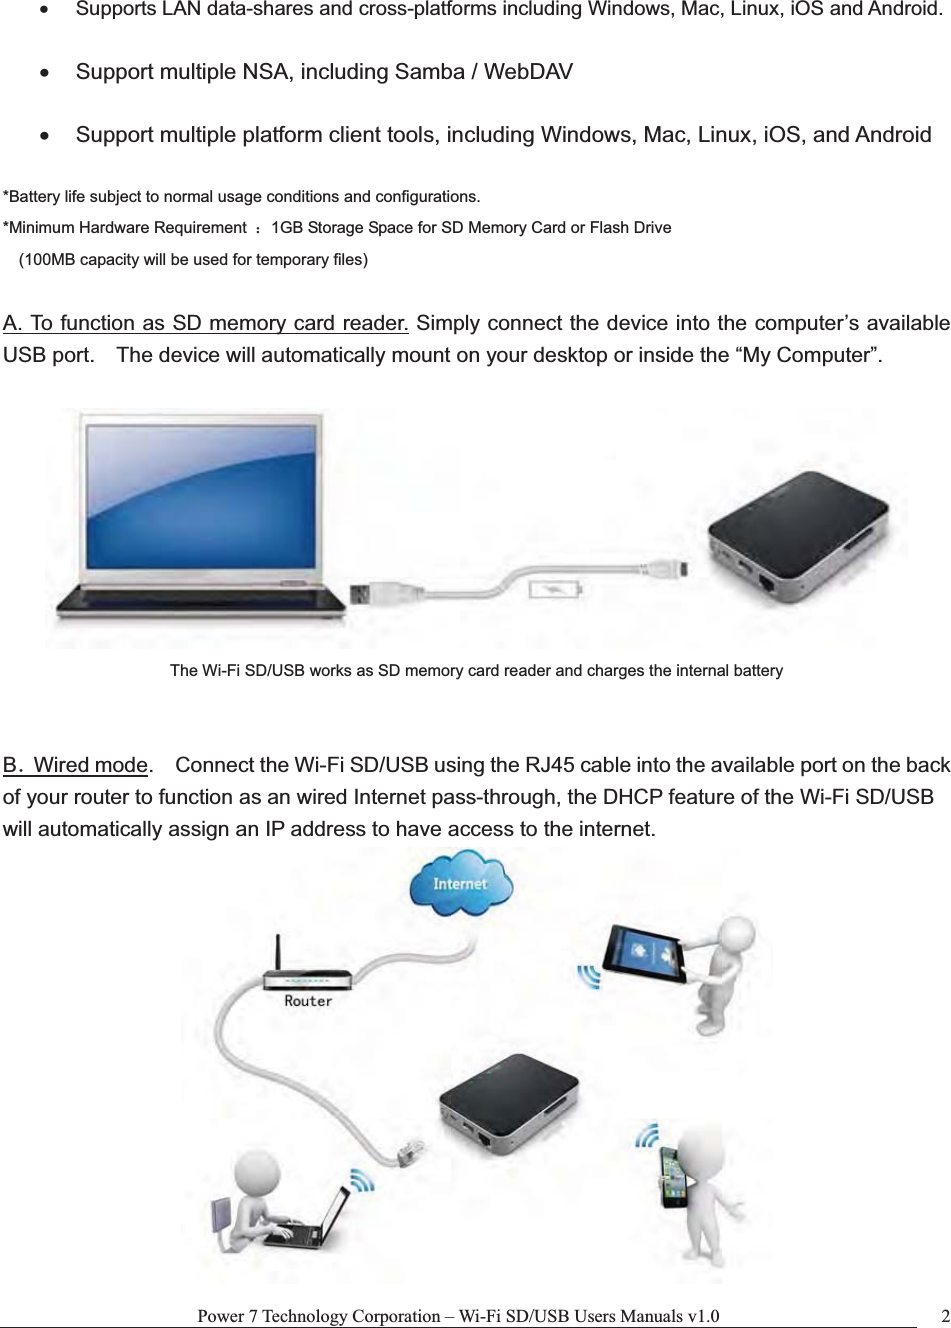 Power 7 Technology Corporation – Wi-Fi SD/USB Users Manuals v1.0  2x  Supports LAN data-shares and cross-platforms including Windows, Mac, Linux, iOS and Android. x  Support multiple NSA, including Samba / WebDAV x  Support multiple platform client tools, including Windows, Mac, Linux, iOS, and Android *Battery life subject to normal usage conditions and configurations. *Minimum Hardware Requirement  ˖1GB Storage Space for SD Memory Card or Flash Drive  (100MB capacity will be used for temporary files) A. To function as SD memory card reader. Simply connect the device into the computer’s available USB port.    The device will automatically mount on your desktop or inside the “My Computer”.     The Wi-Fi SD/USB works as SD memory card reader and charges the internal battery BˊWired mode.    Connect the Wi-Fi SD/USB using the RJ45 cable into the available port on the back of your router to function as an wired Internet pass-through, the DHCP feature of the Wi-Fi SD/USB will automatically assign an IP address to have access to the internet. 